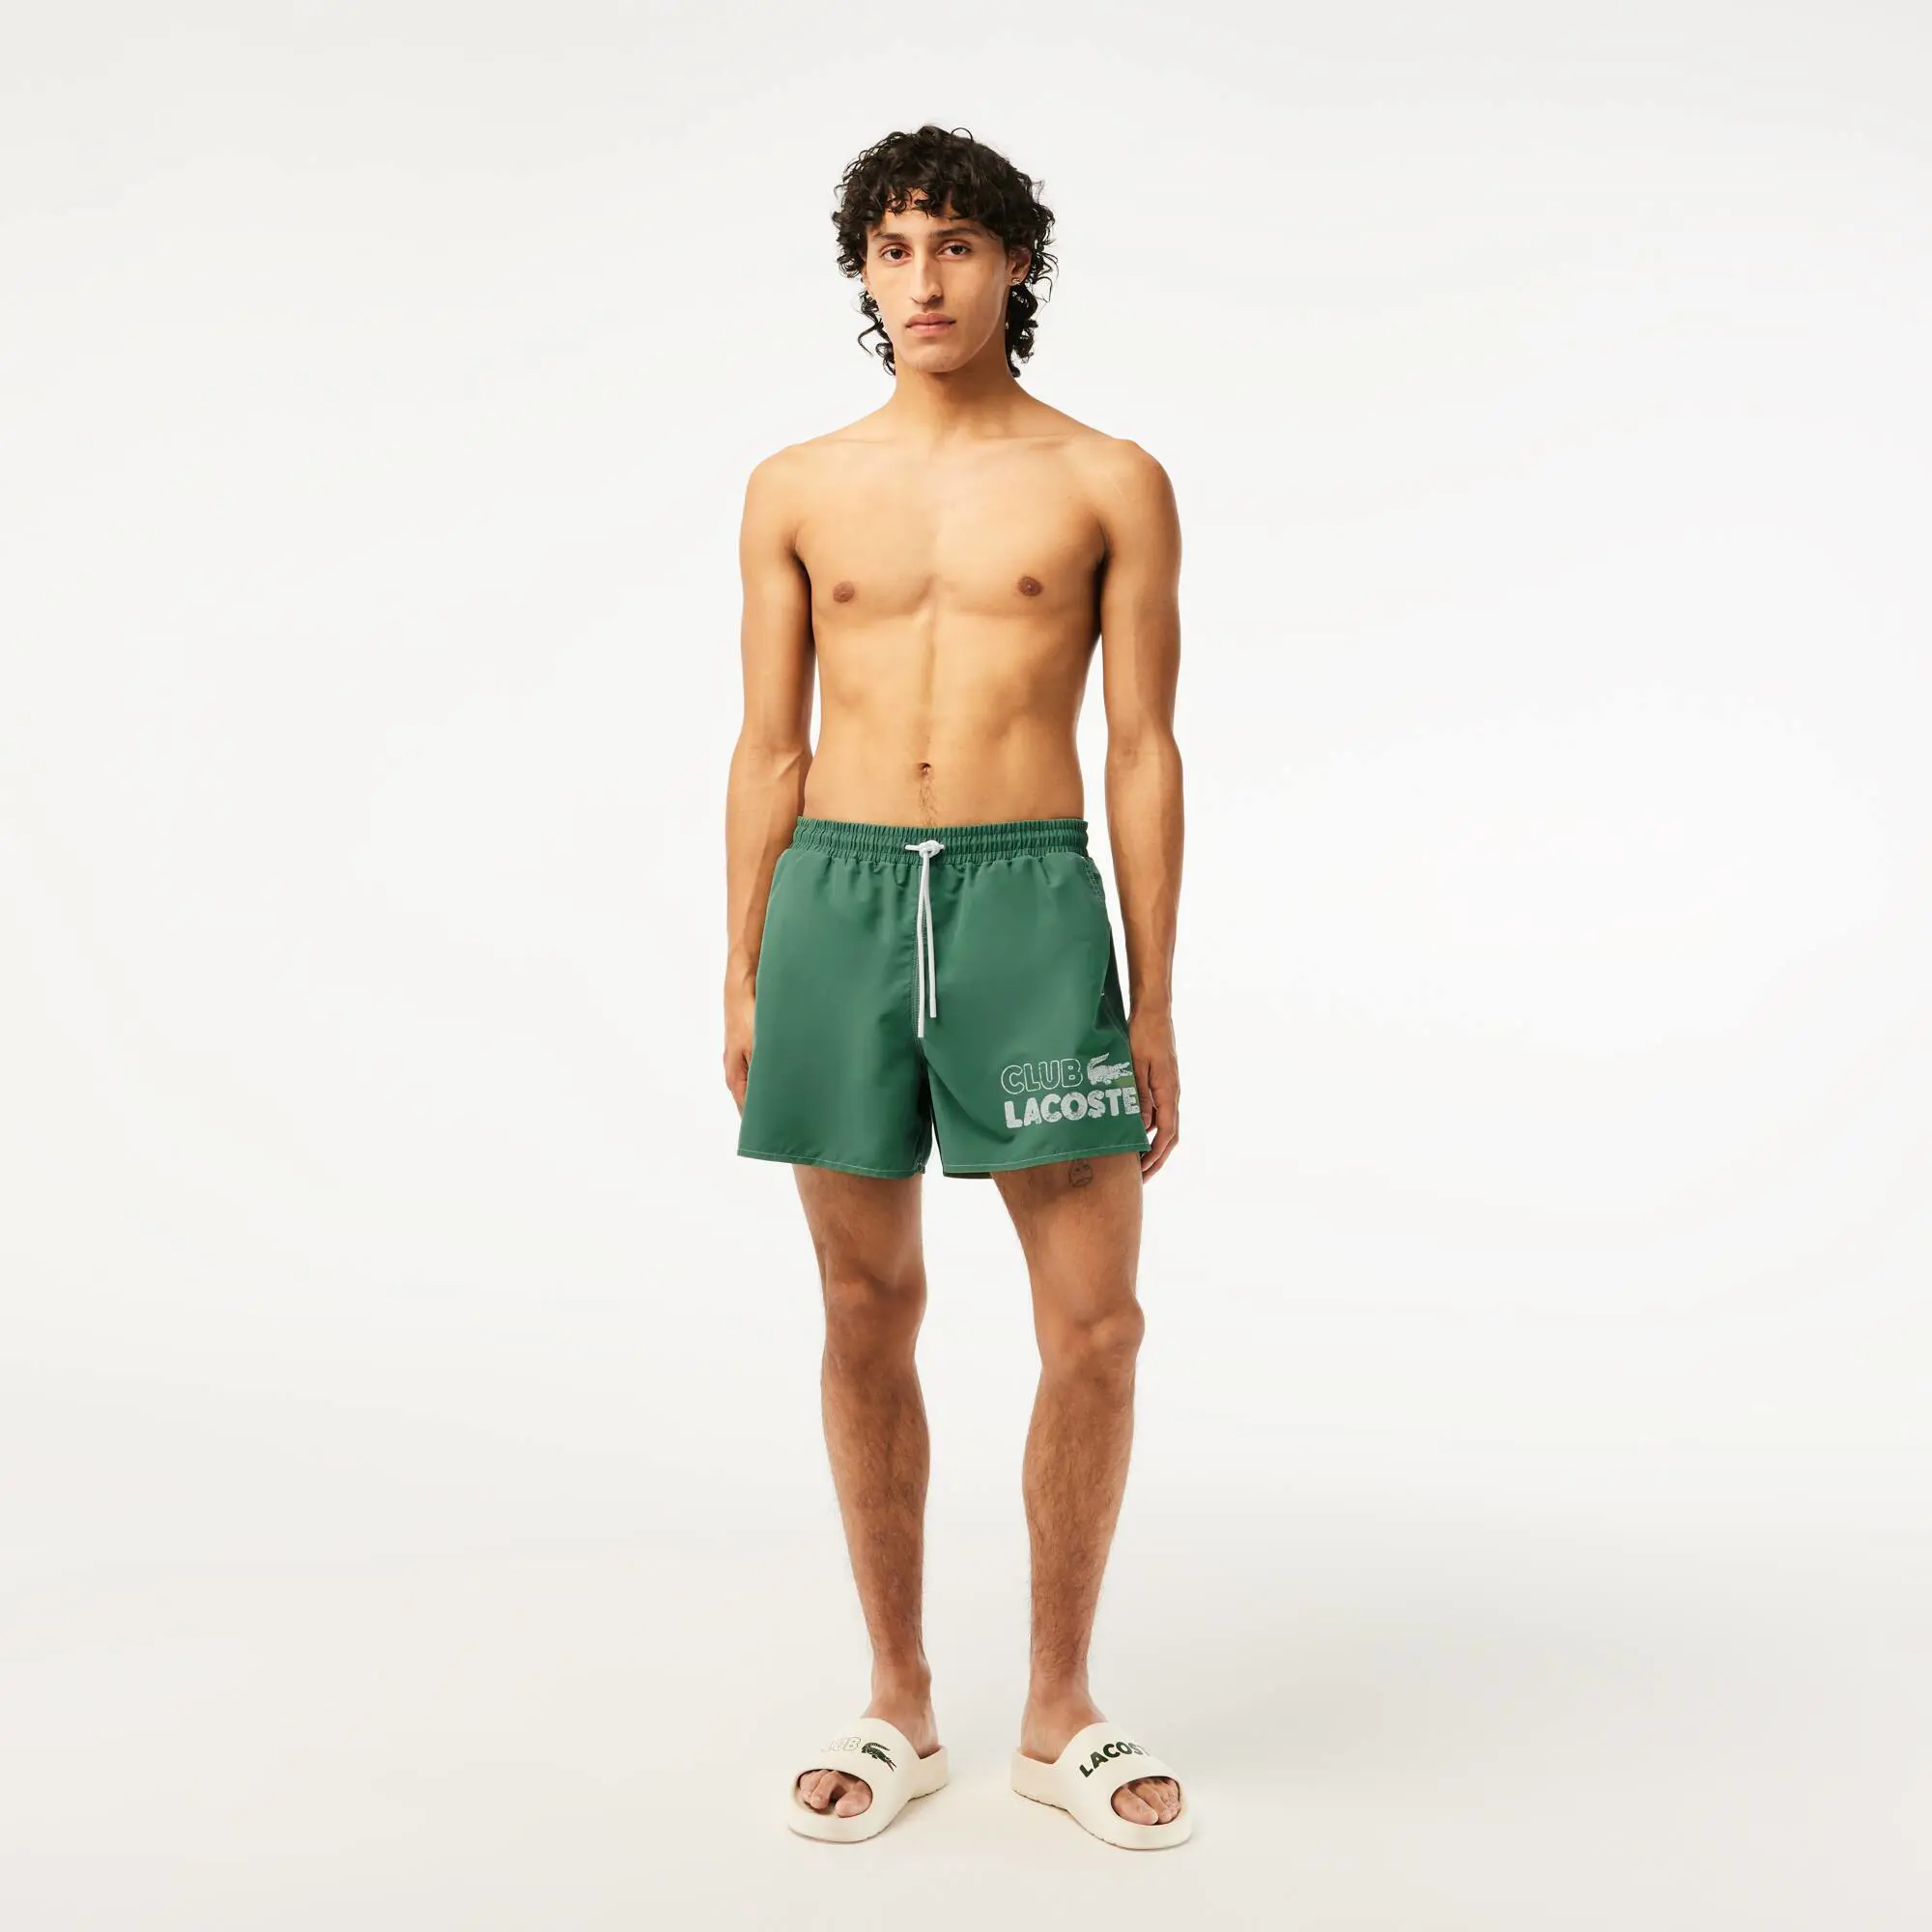 Lacoste Men’s Lacoste Quick Dry Swim Trunks with Integrated Lining. 1